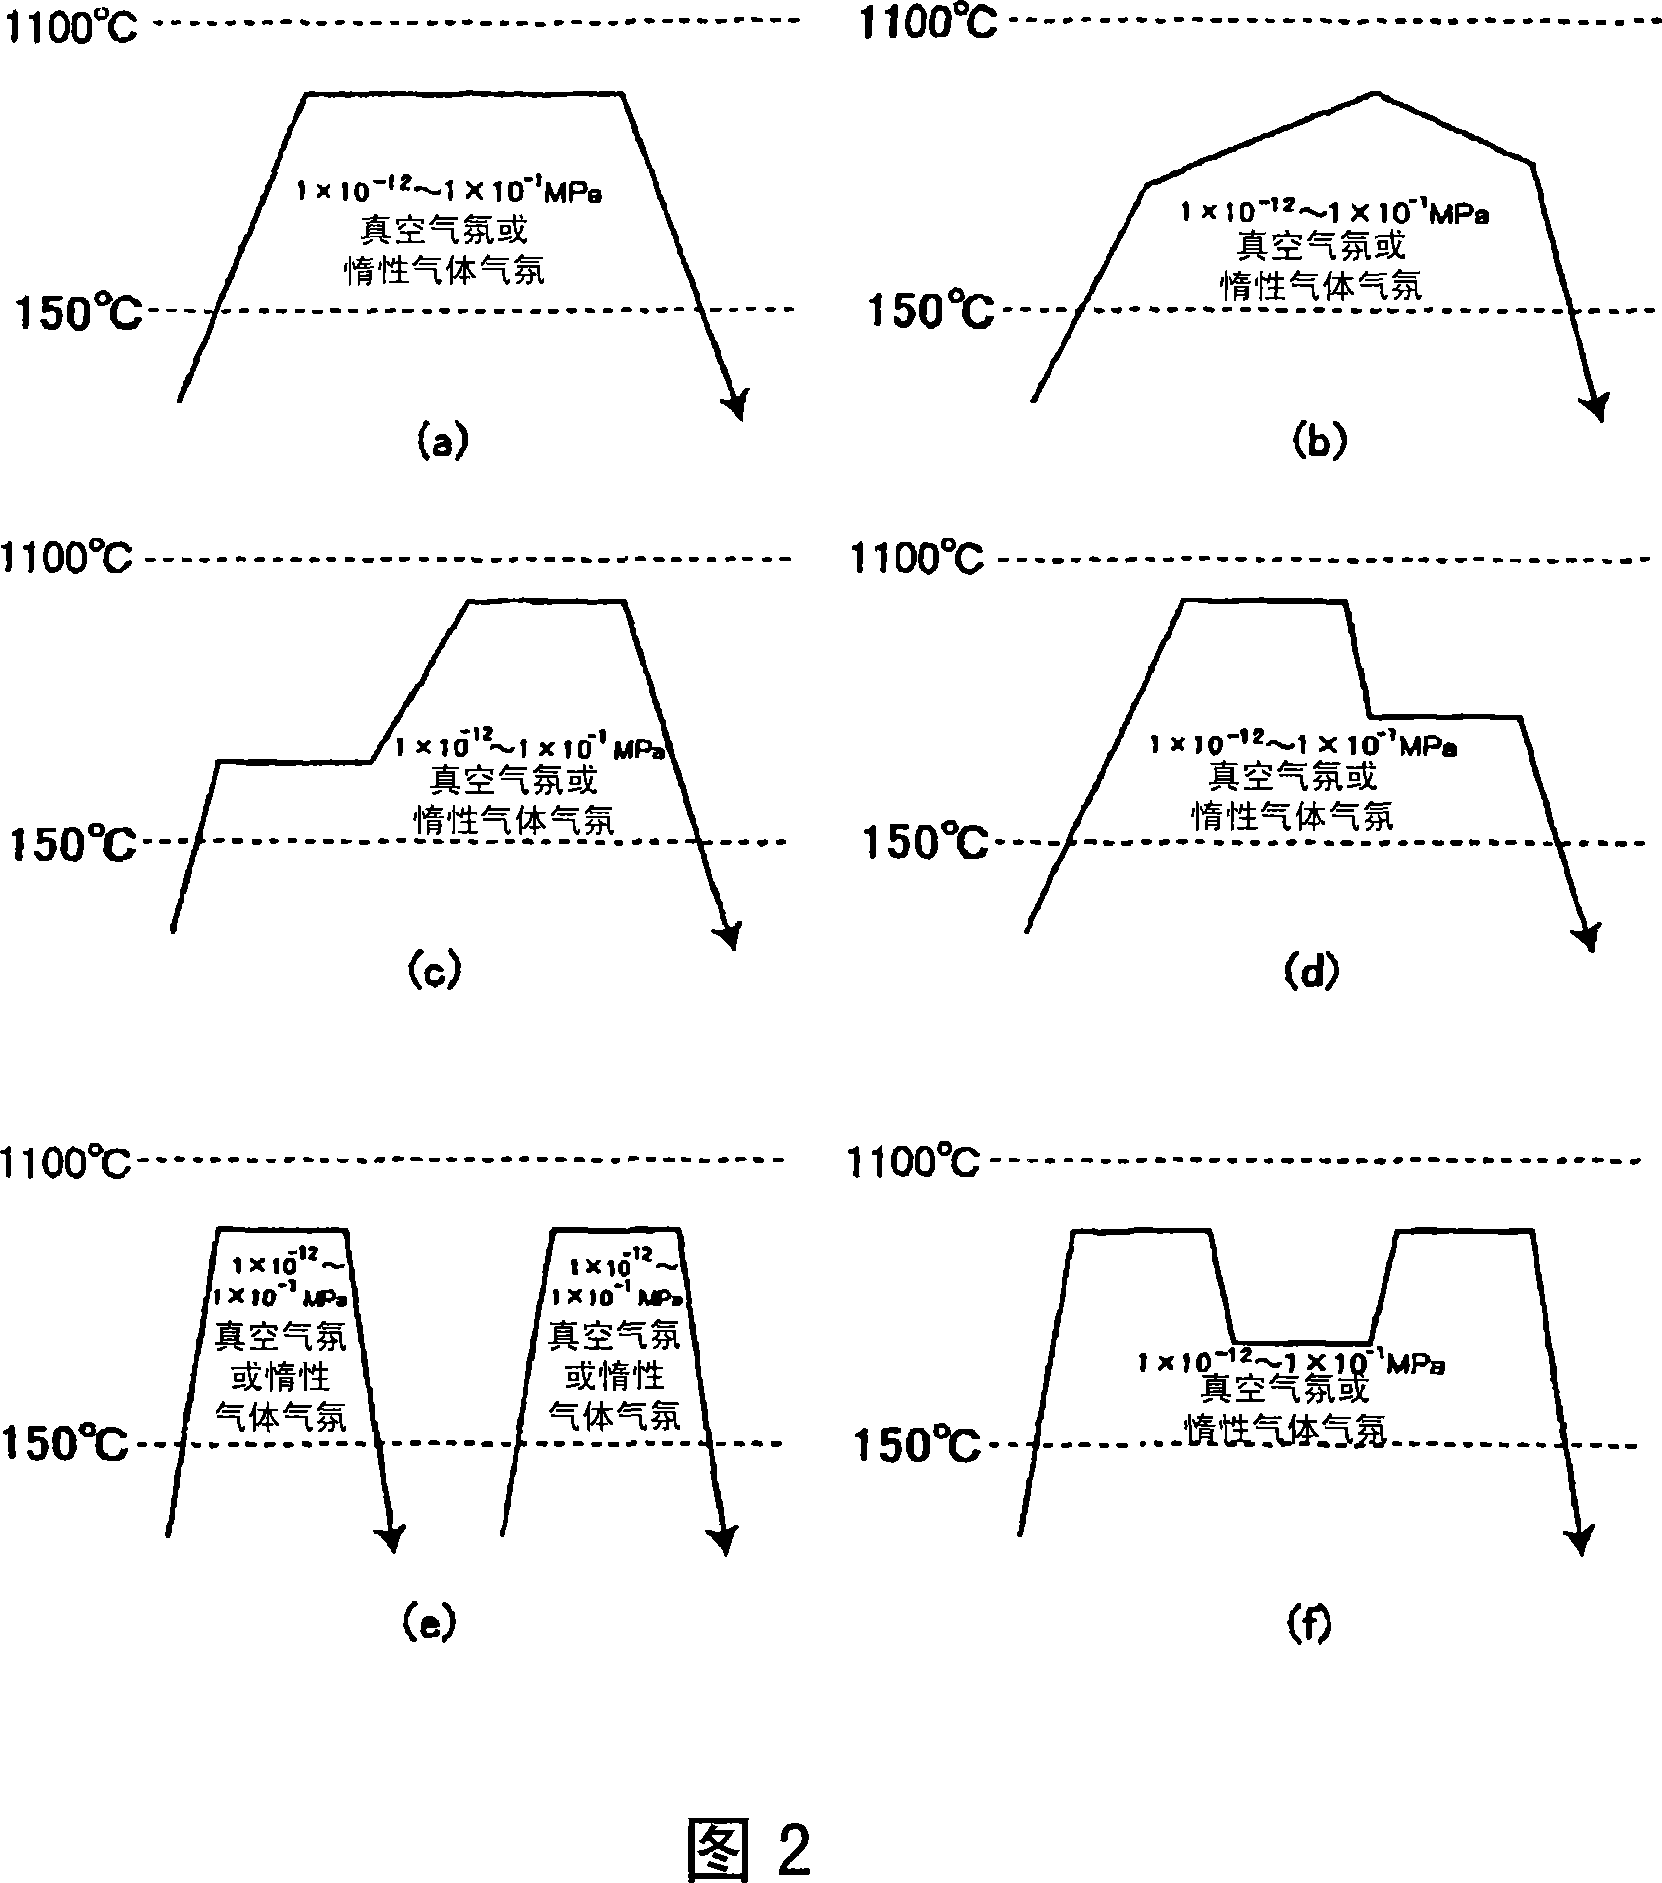 Method for producing soft magnetic metal powder coated with Mg-containing oxide film and method for producing composite soft magnetic material from the powder